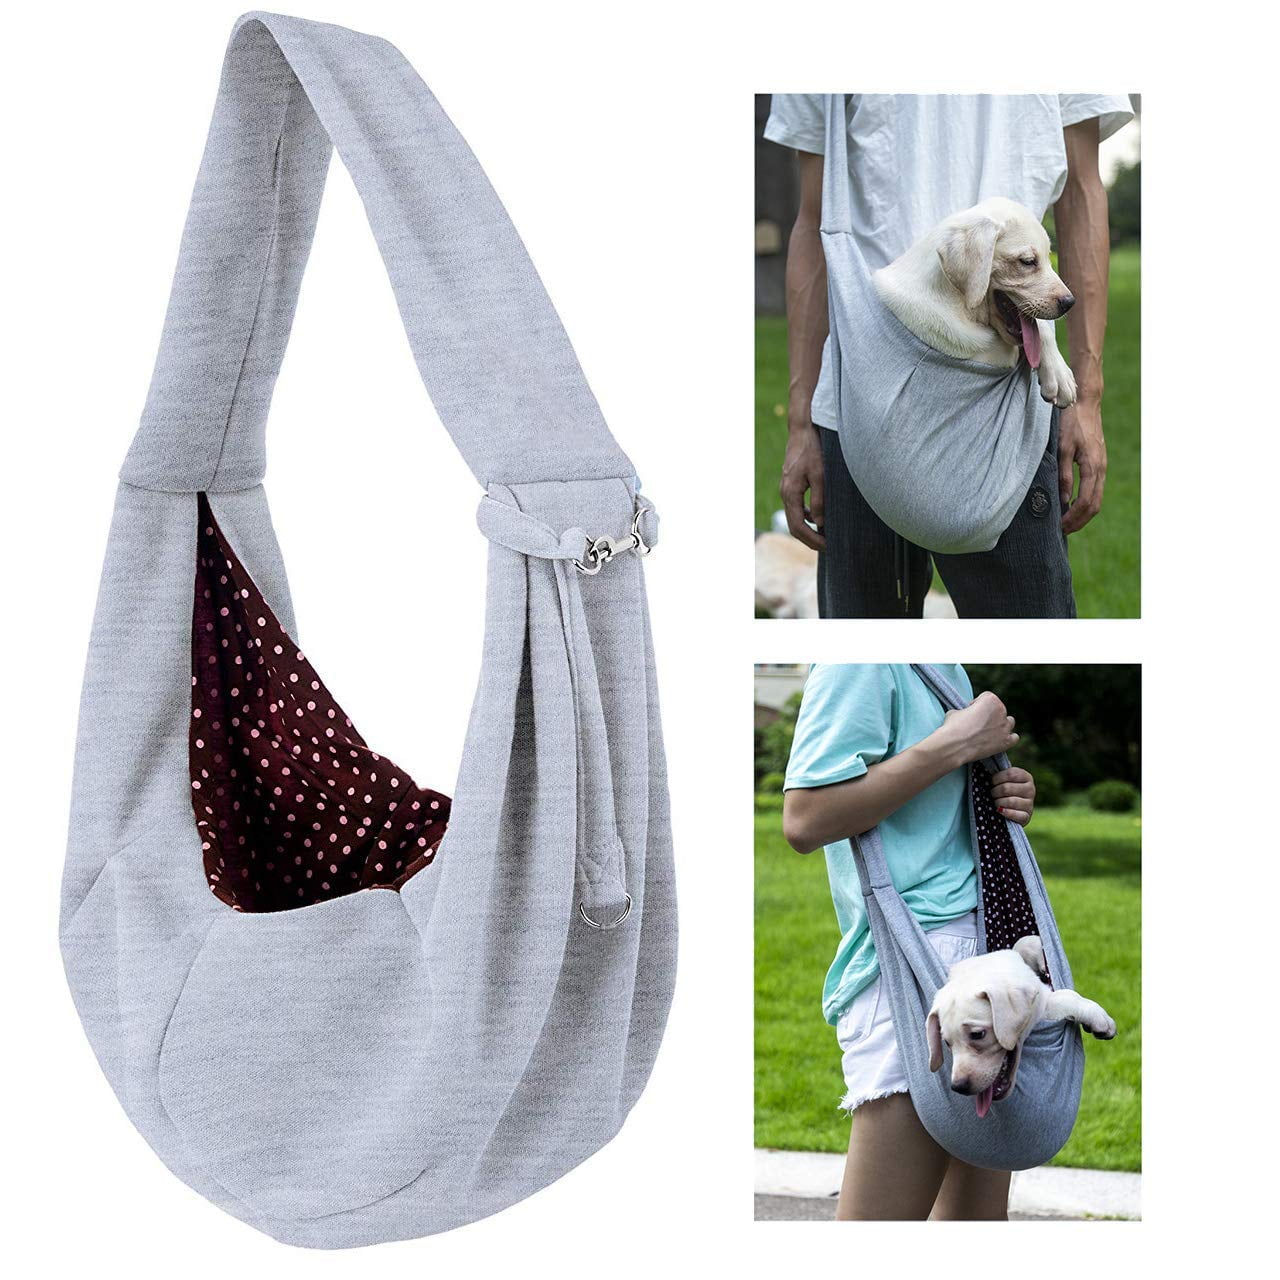 Comfortable Soft to Travel Puppy Kitty Rabbit Zippered Pouch Shoulder Carry Tote Handbag Tesfish Hands Free Small Dog Cat Rubbit Carrier Sling Bag Red